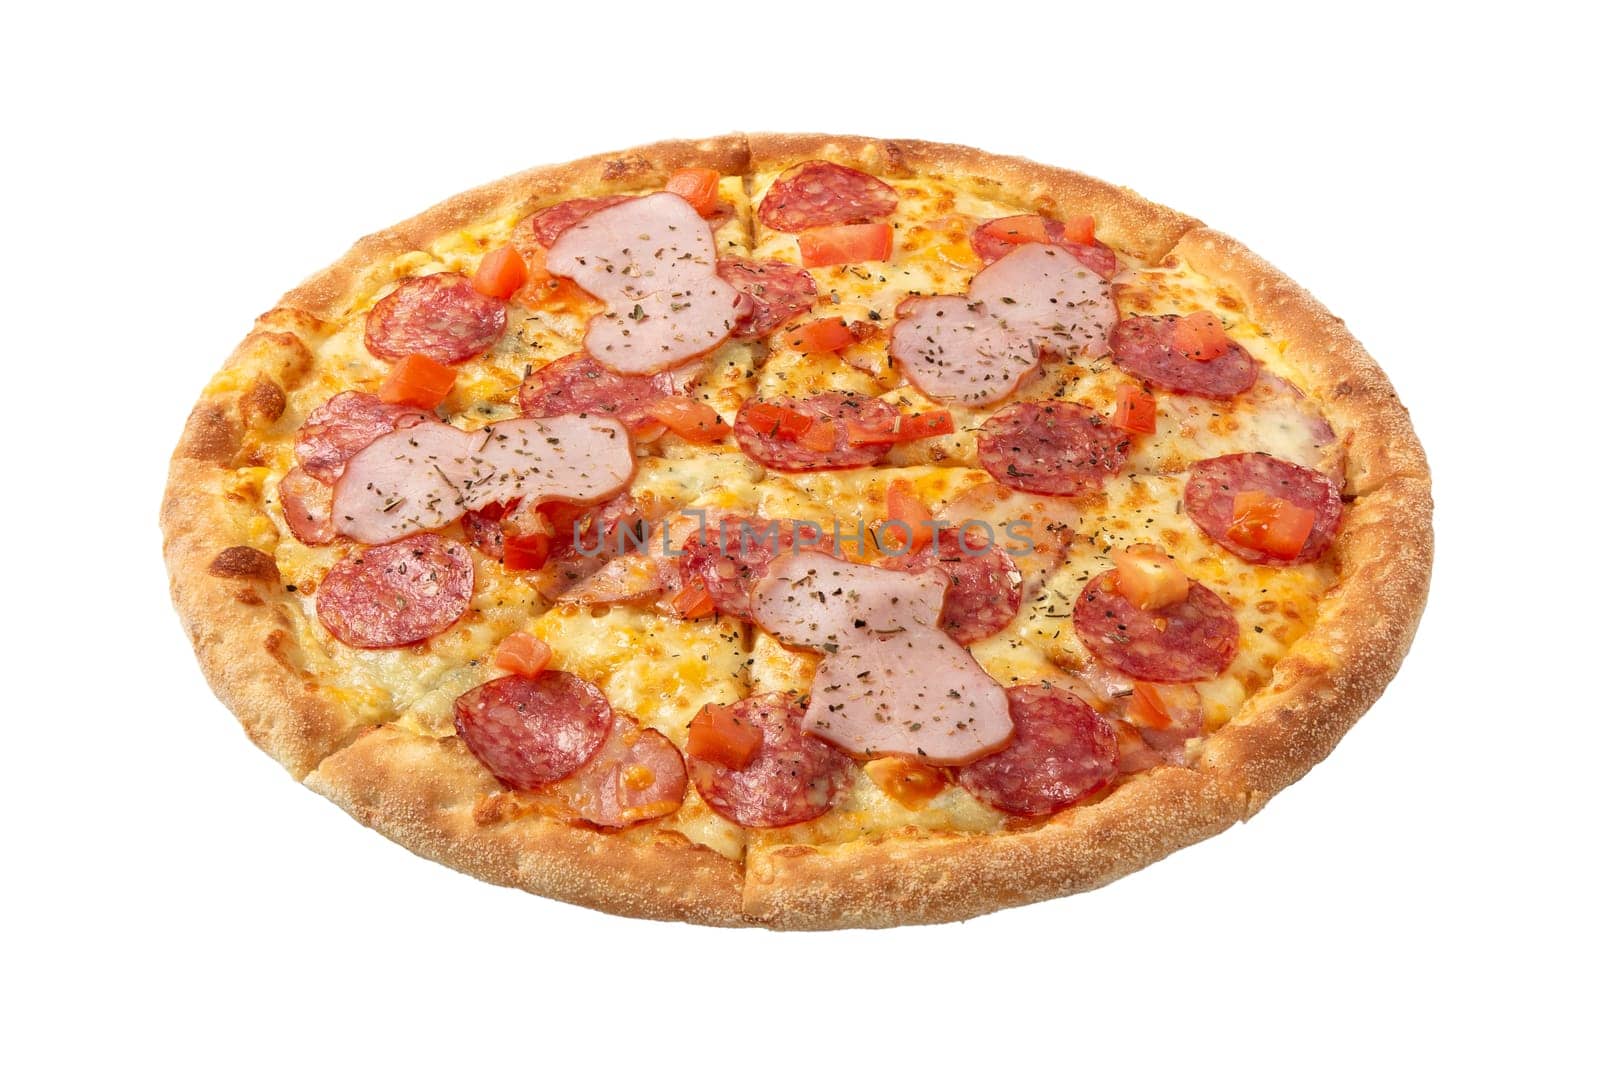 Delicious classic italian Pizza Pepperoni with sausages and cheese mozzarella. Fresh italian classic original pepperoni pizza isolated on white background.